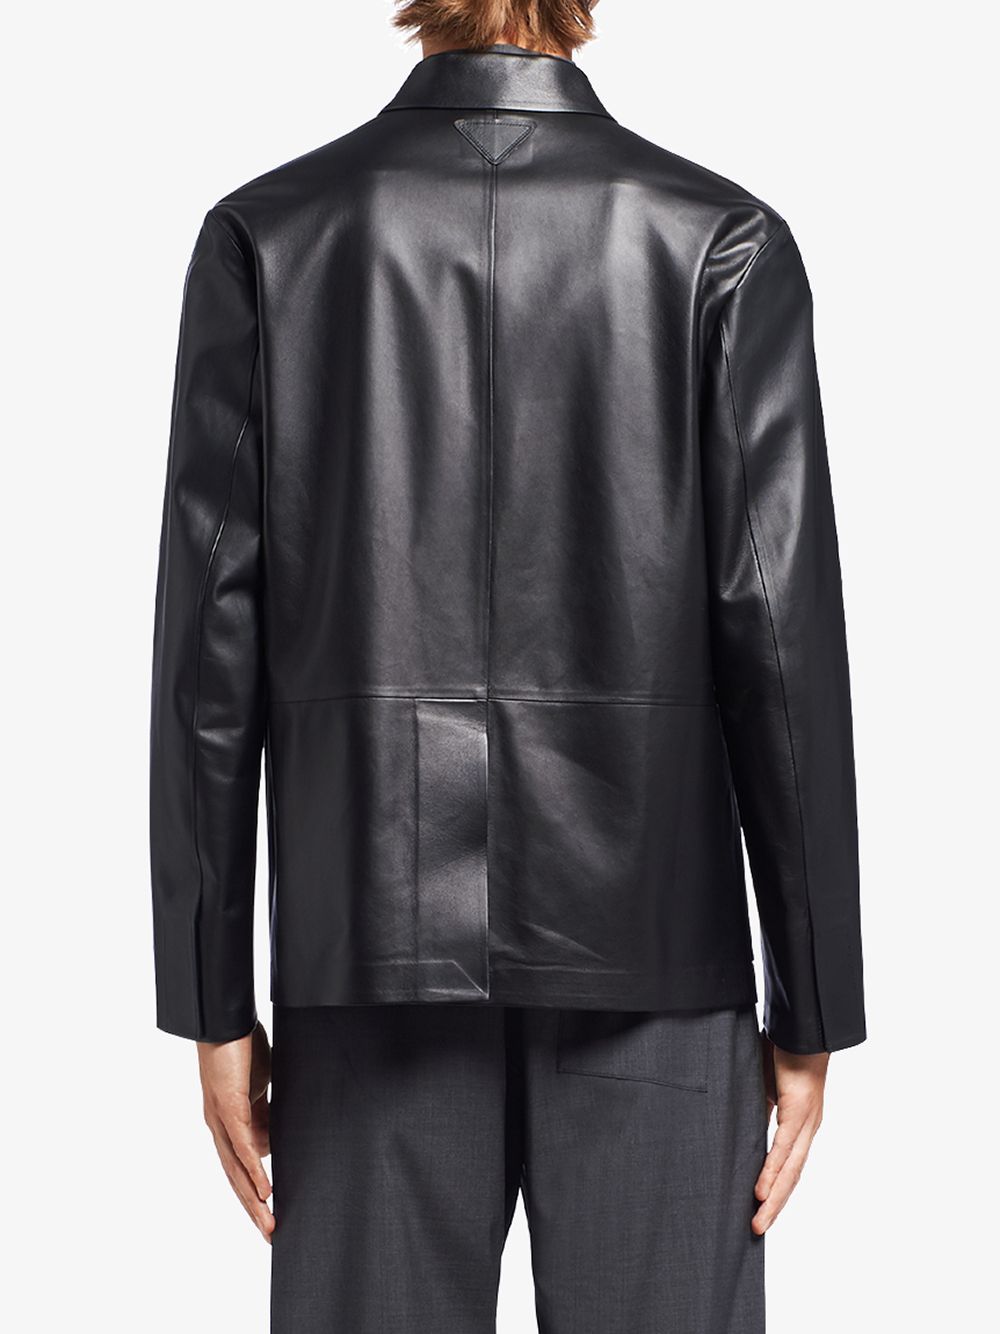 Shop Prada nappa leather jacket with Express Delivery - FARFETCH